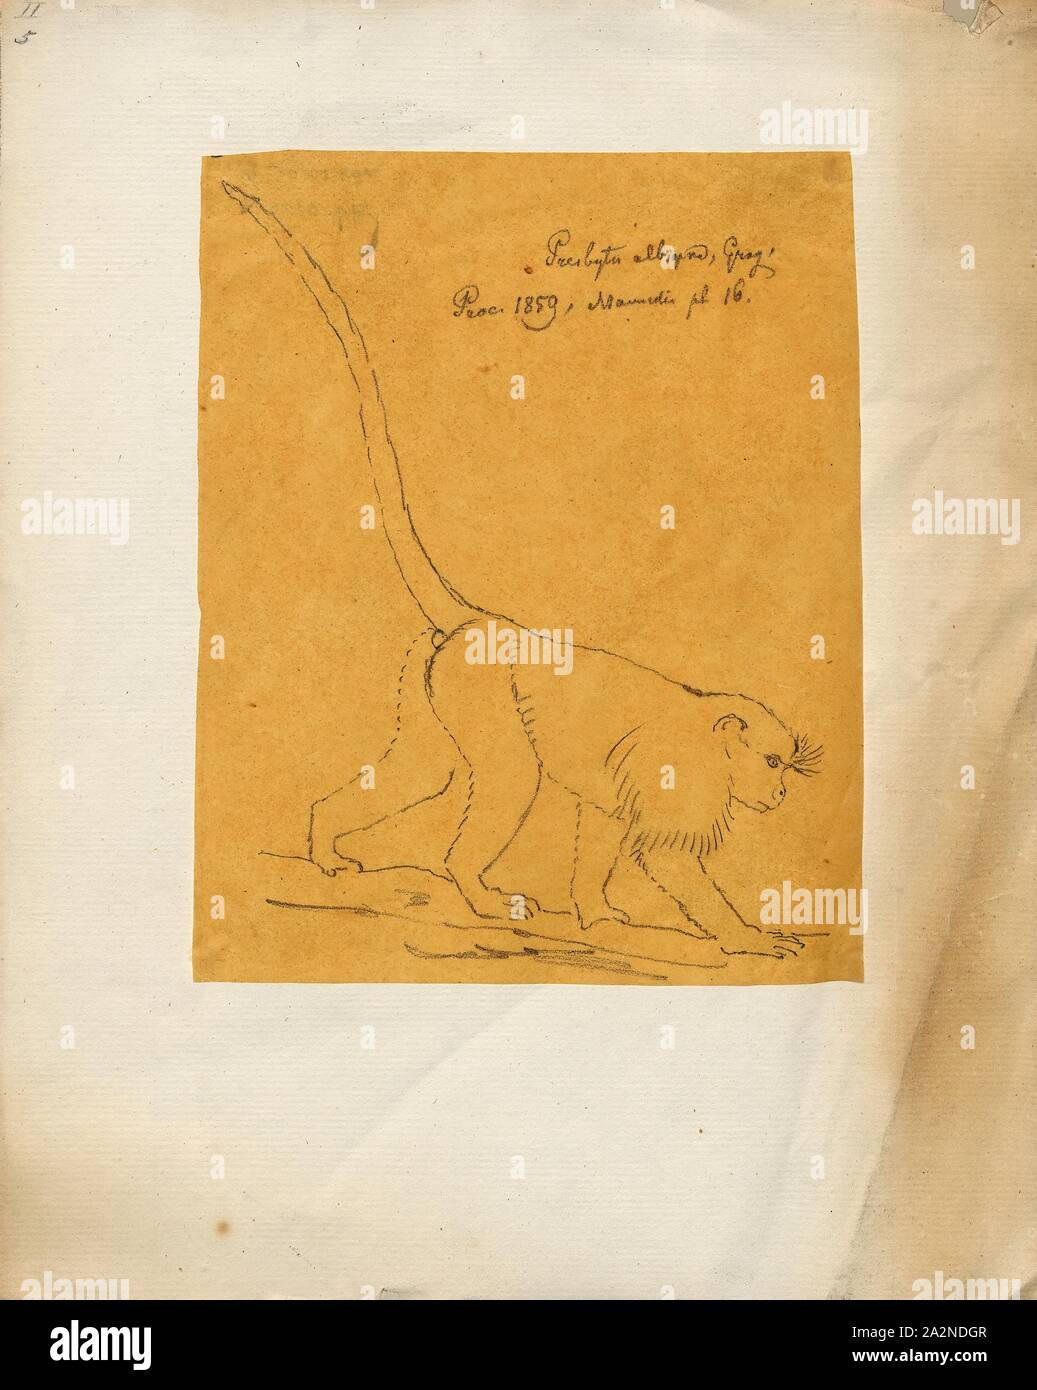 Presbytis albigena, Print, Surili, The surilis are a group of Old World monkeys and make up the entirety of the genus Presbytis. They live in the Thai-Malay Peninsula, on Sumatra, Borneo, Java and smaller nearby islands., 1700-1880 Stock Photo